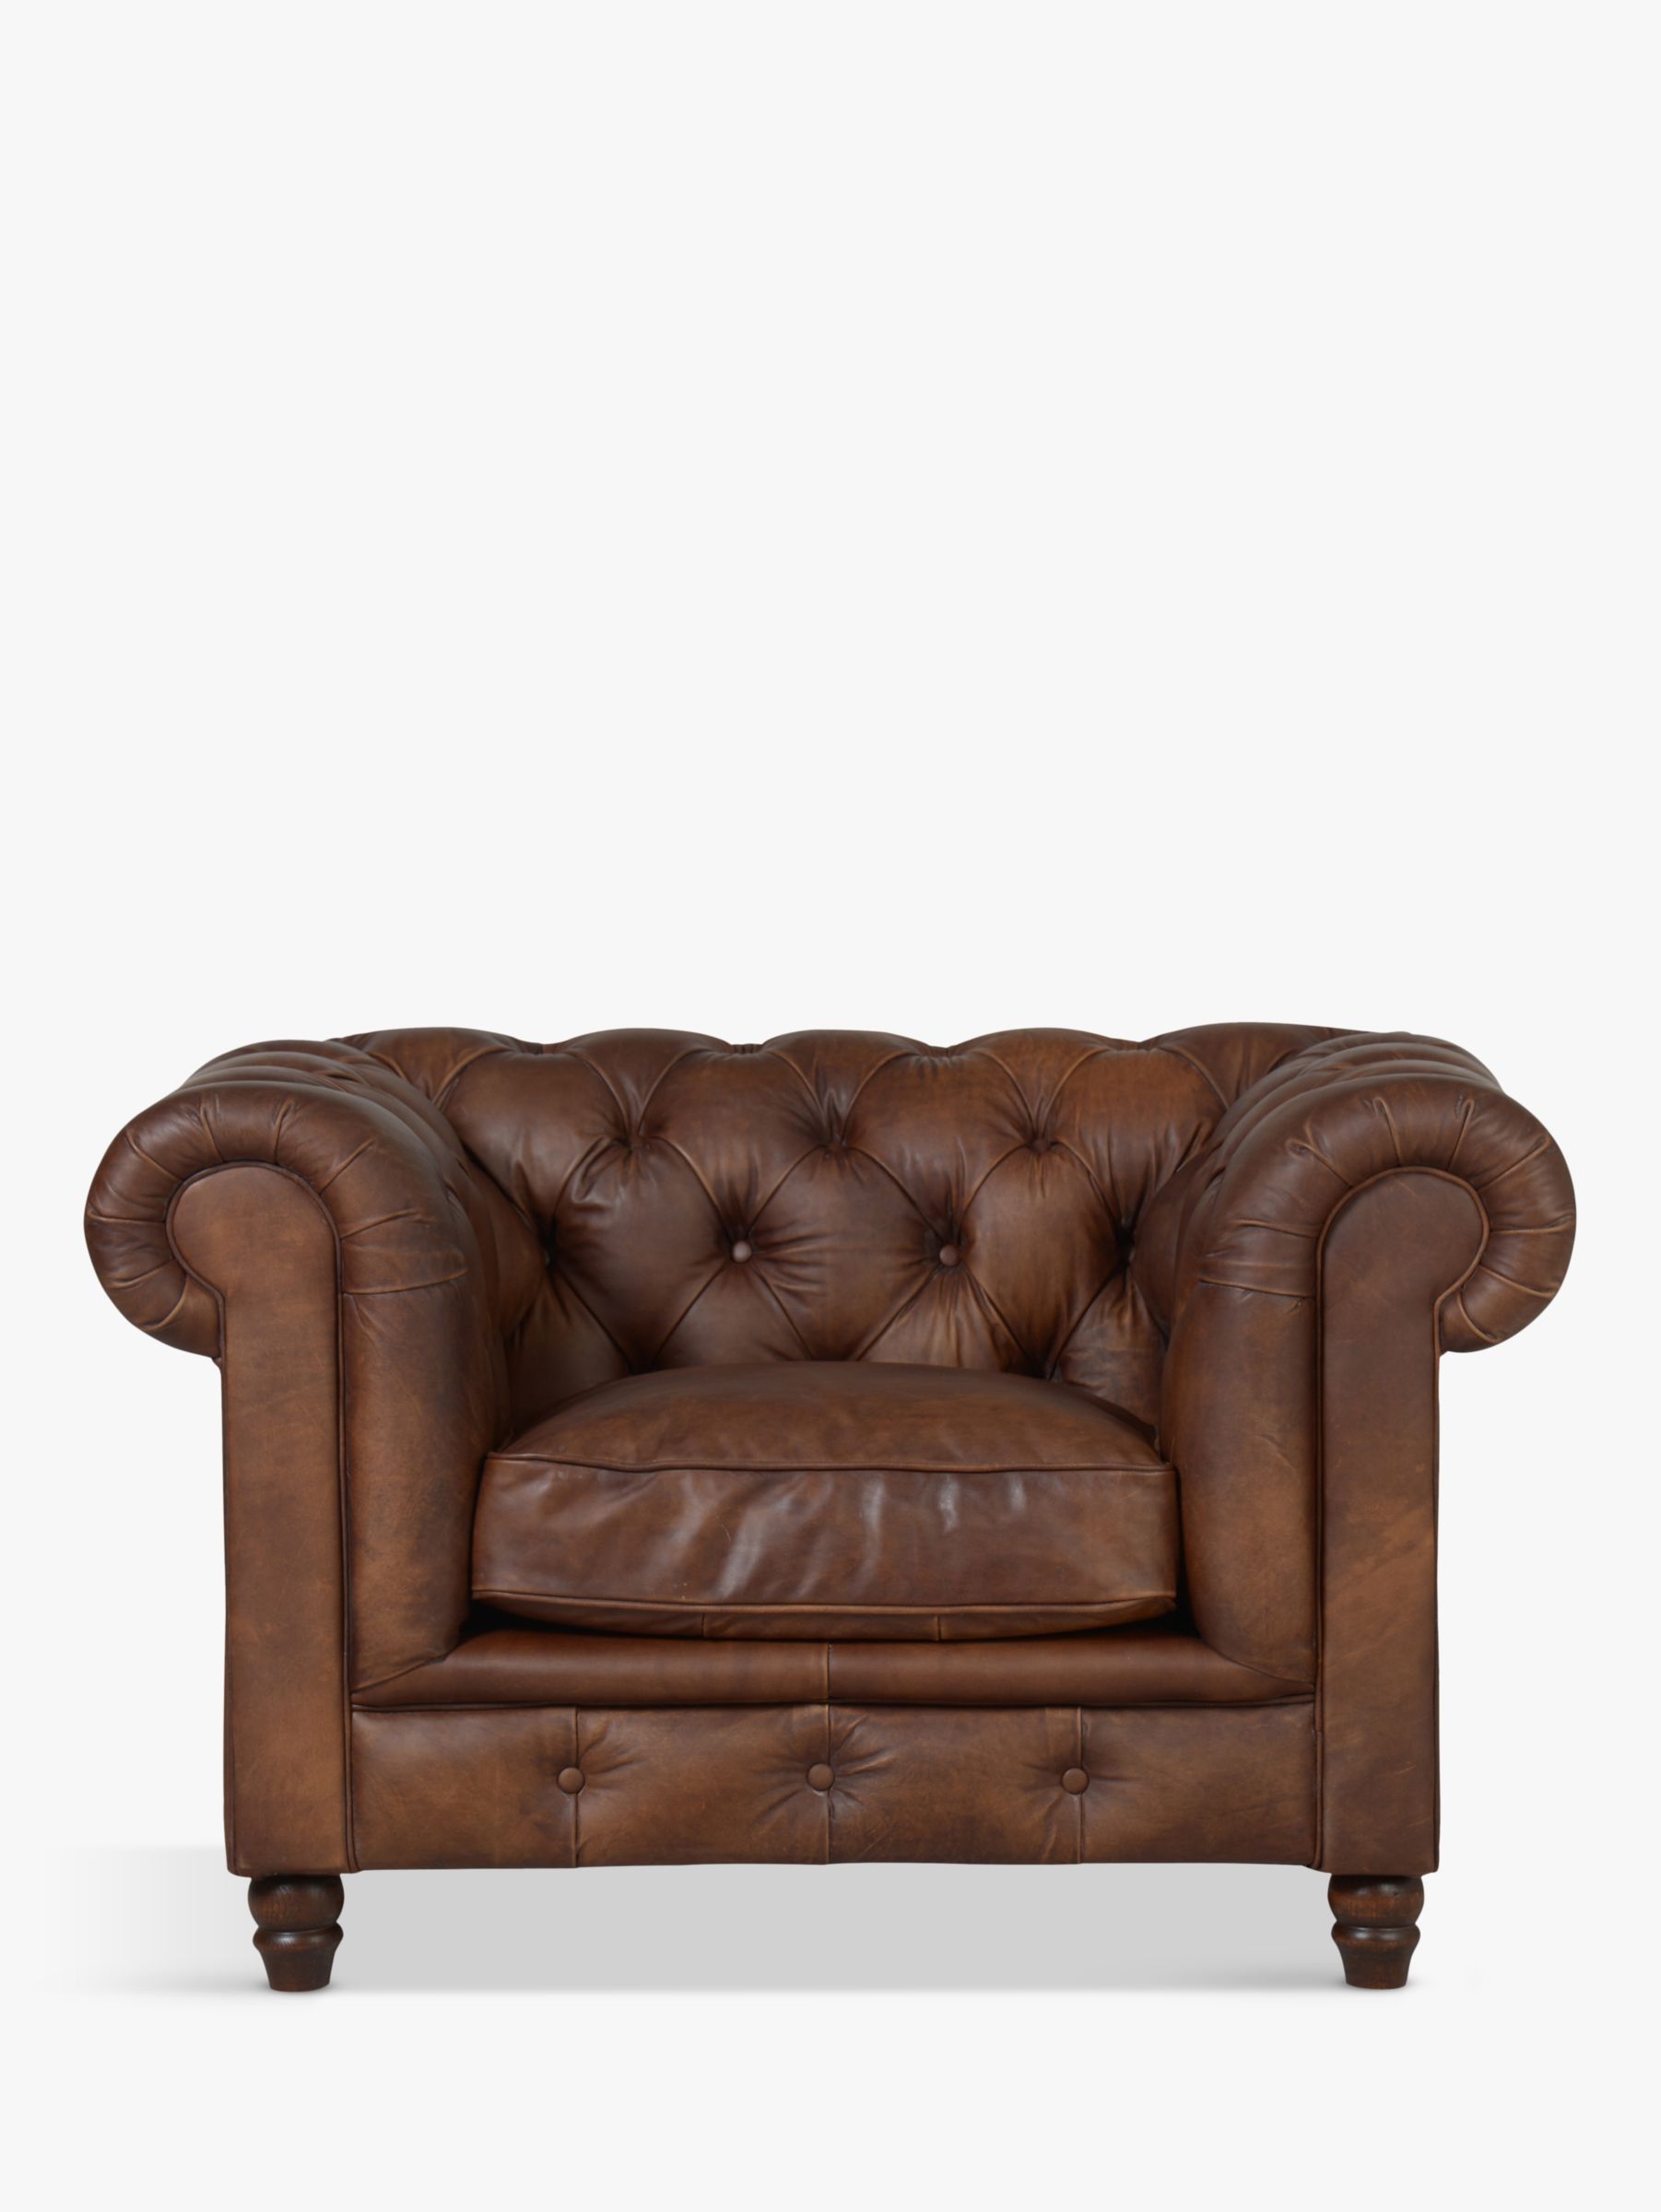 Photo of Halo earle chesterfield leather armchair antique whisky